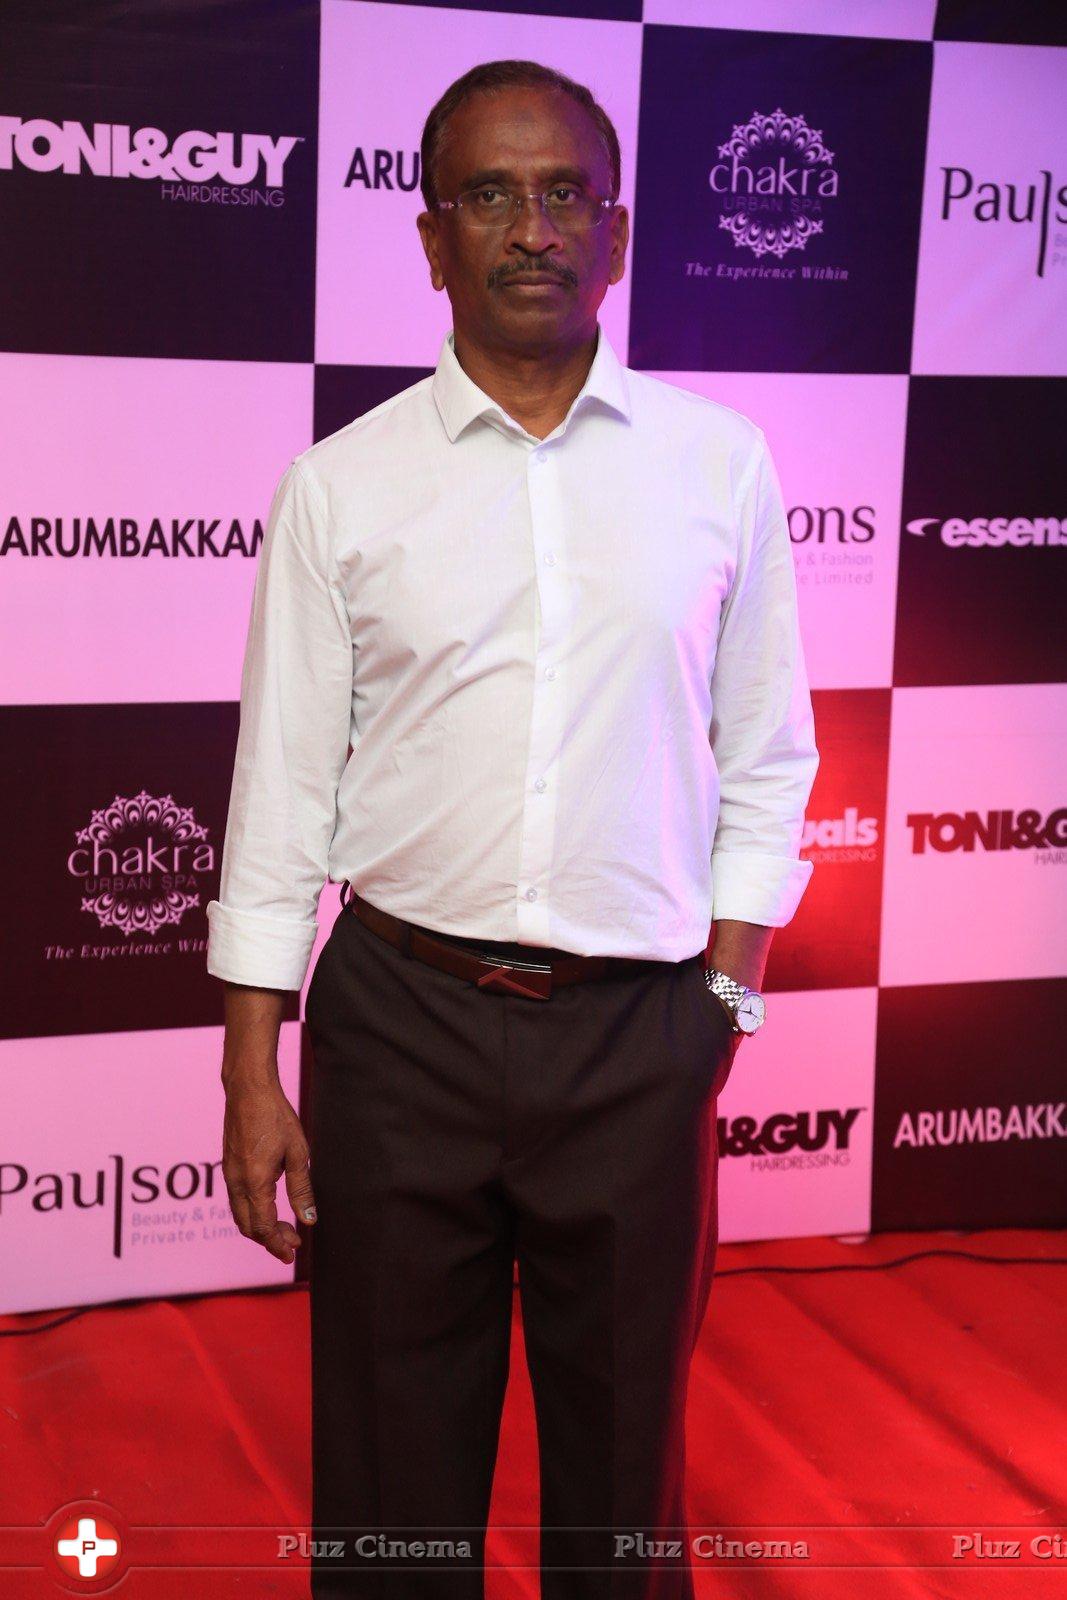 Toni and Guy Essensuals Launch at Arumbakkam Chennai Photos | Picture 1184662